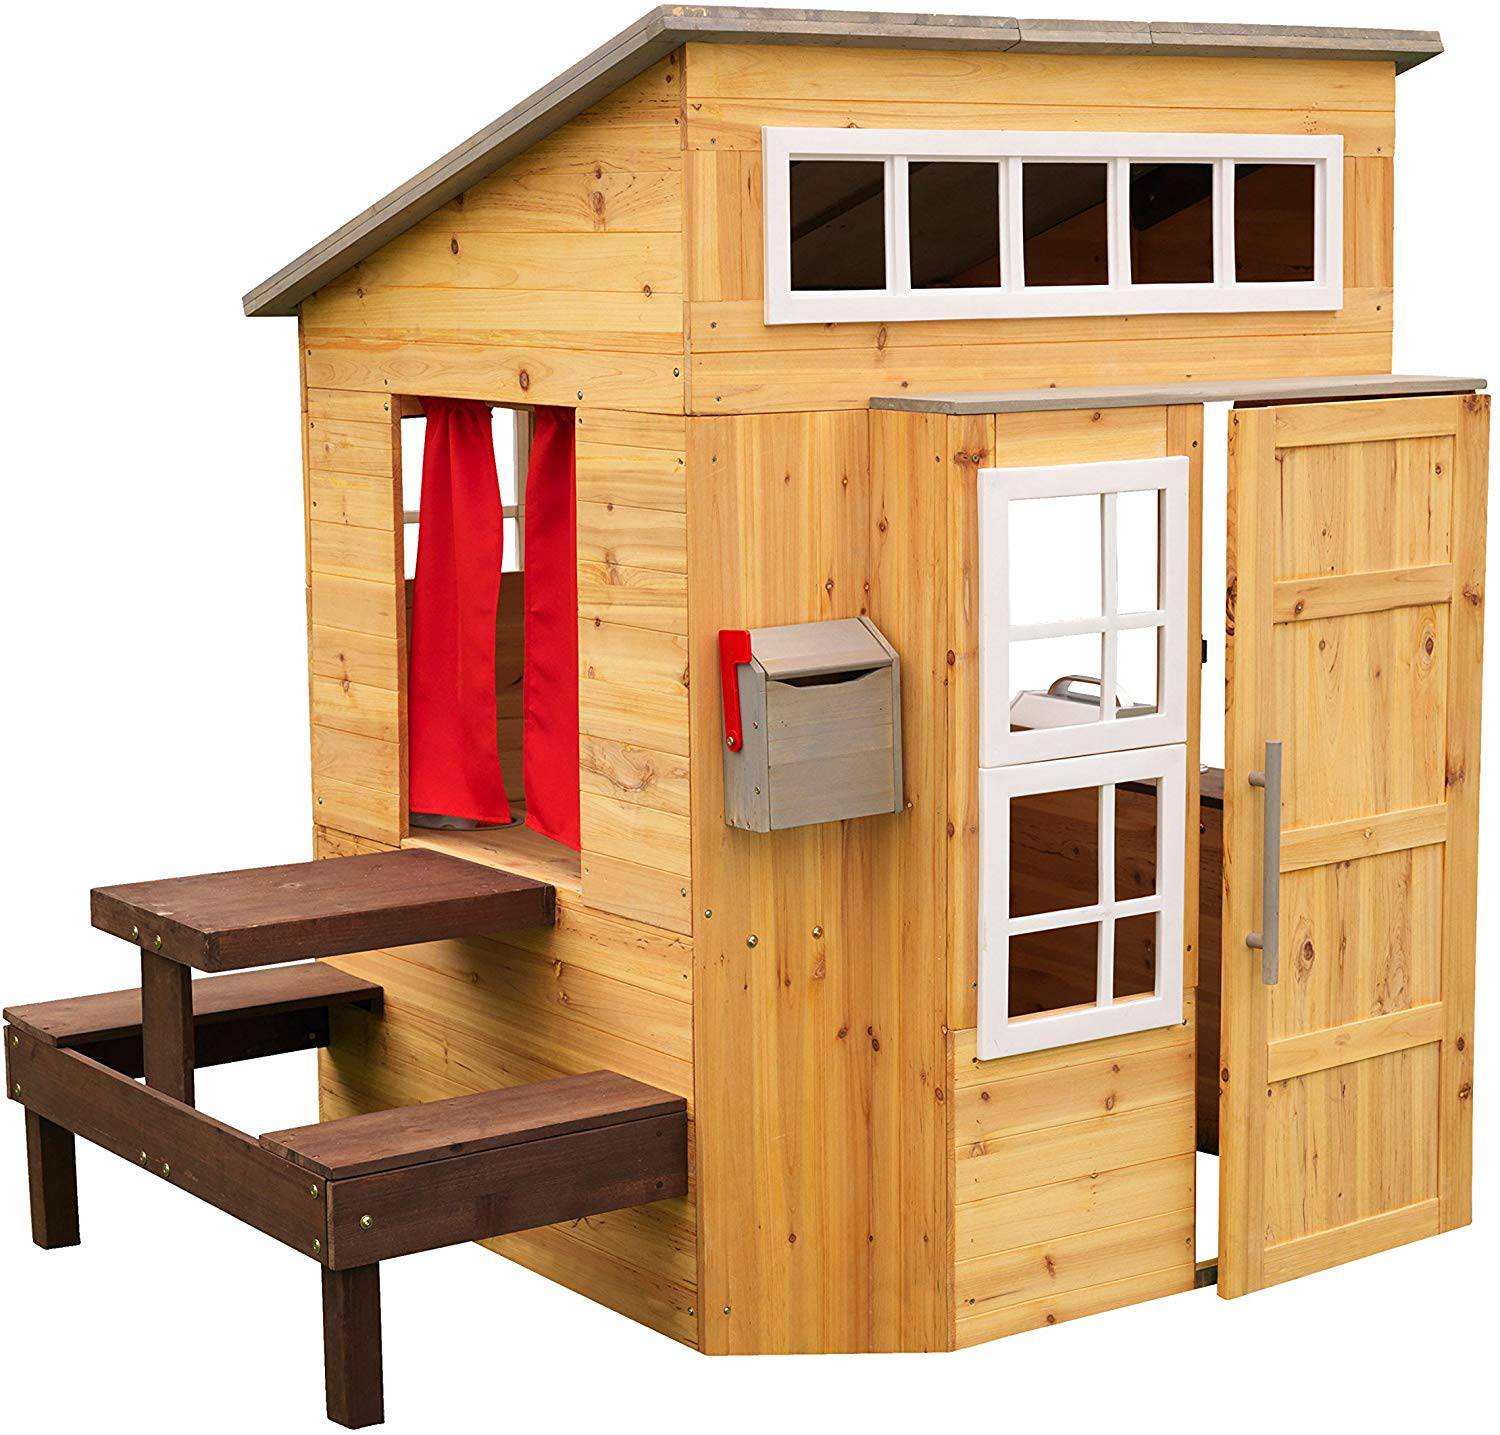 OUTDOOR PLAY HOUSE